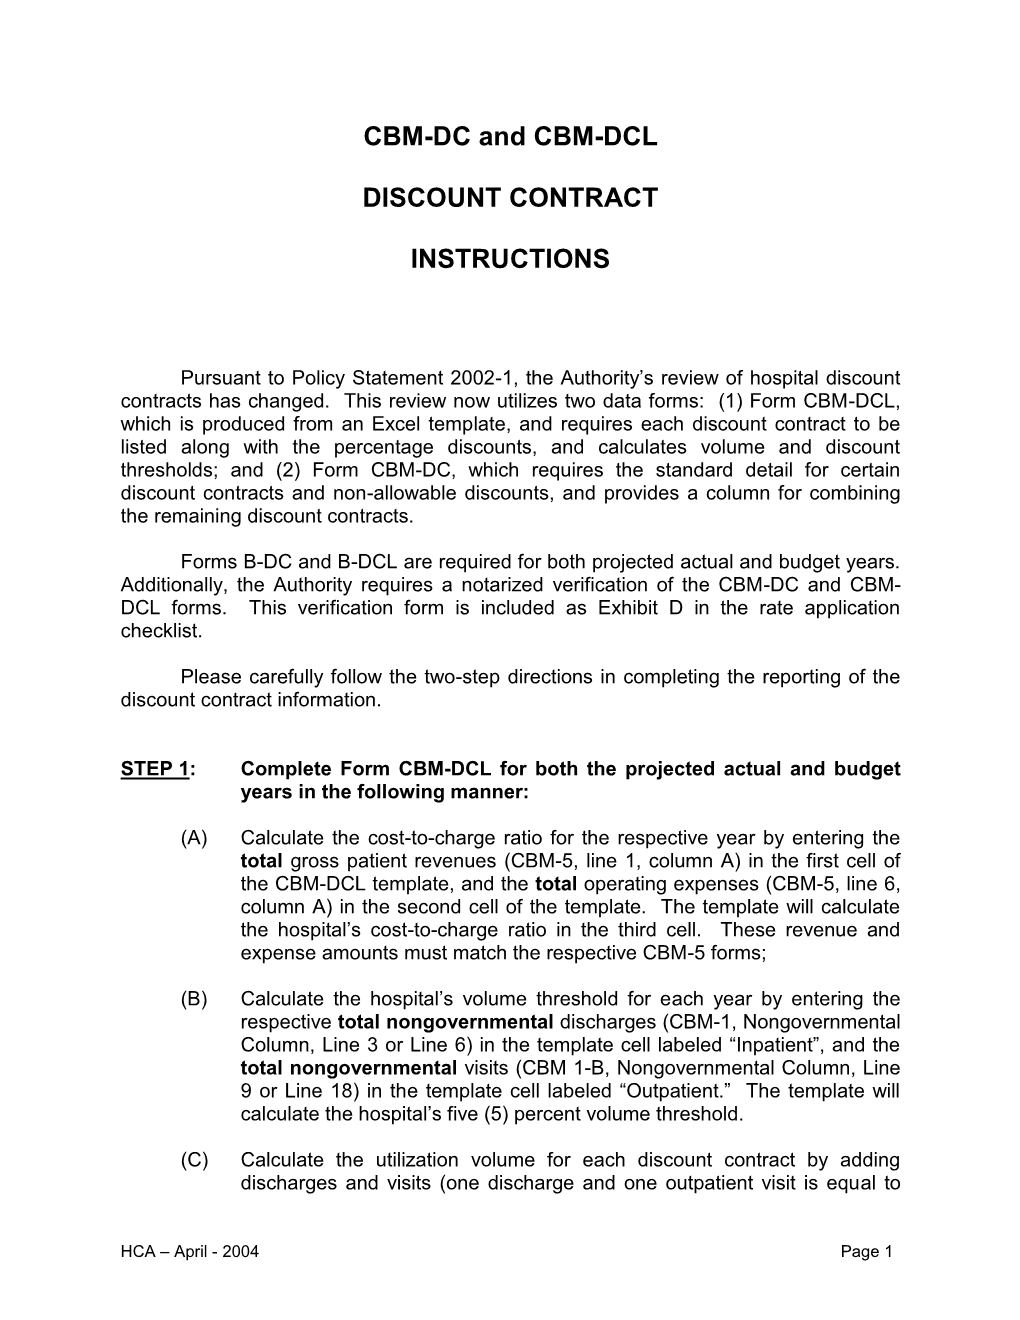 CBM-DC and CBM-DCL DISCOUNT CONTRACT INSTRUCTIONS